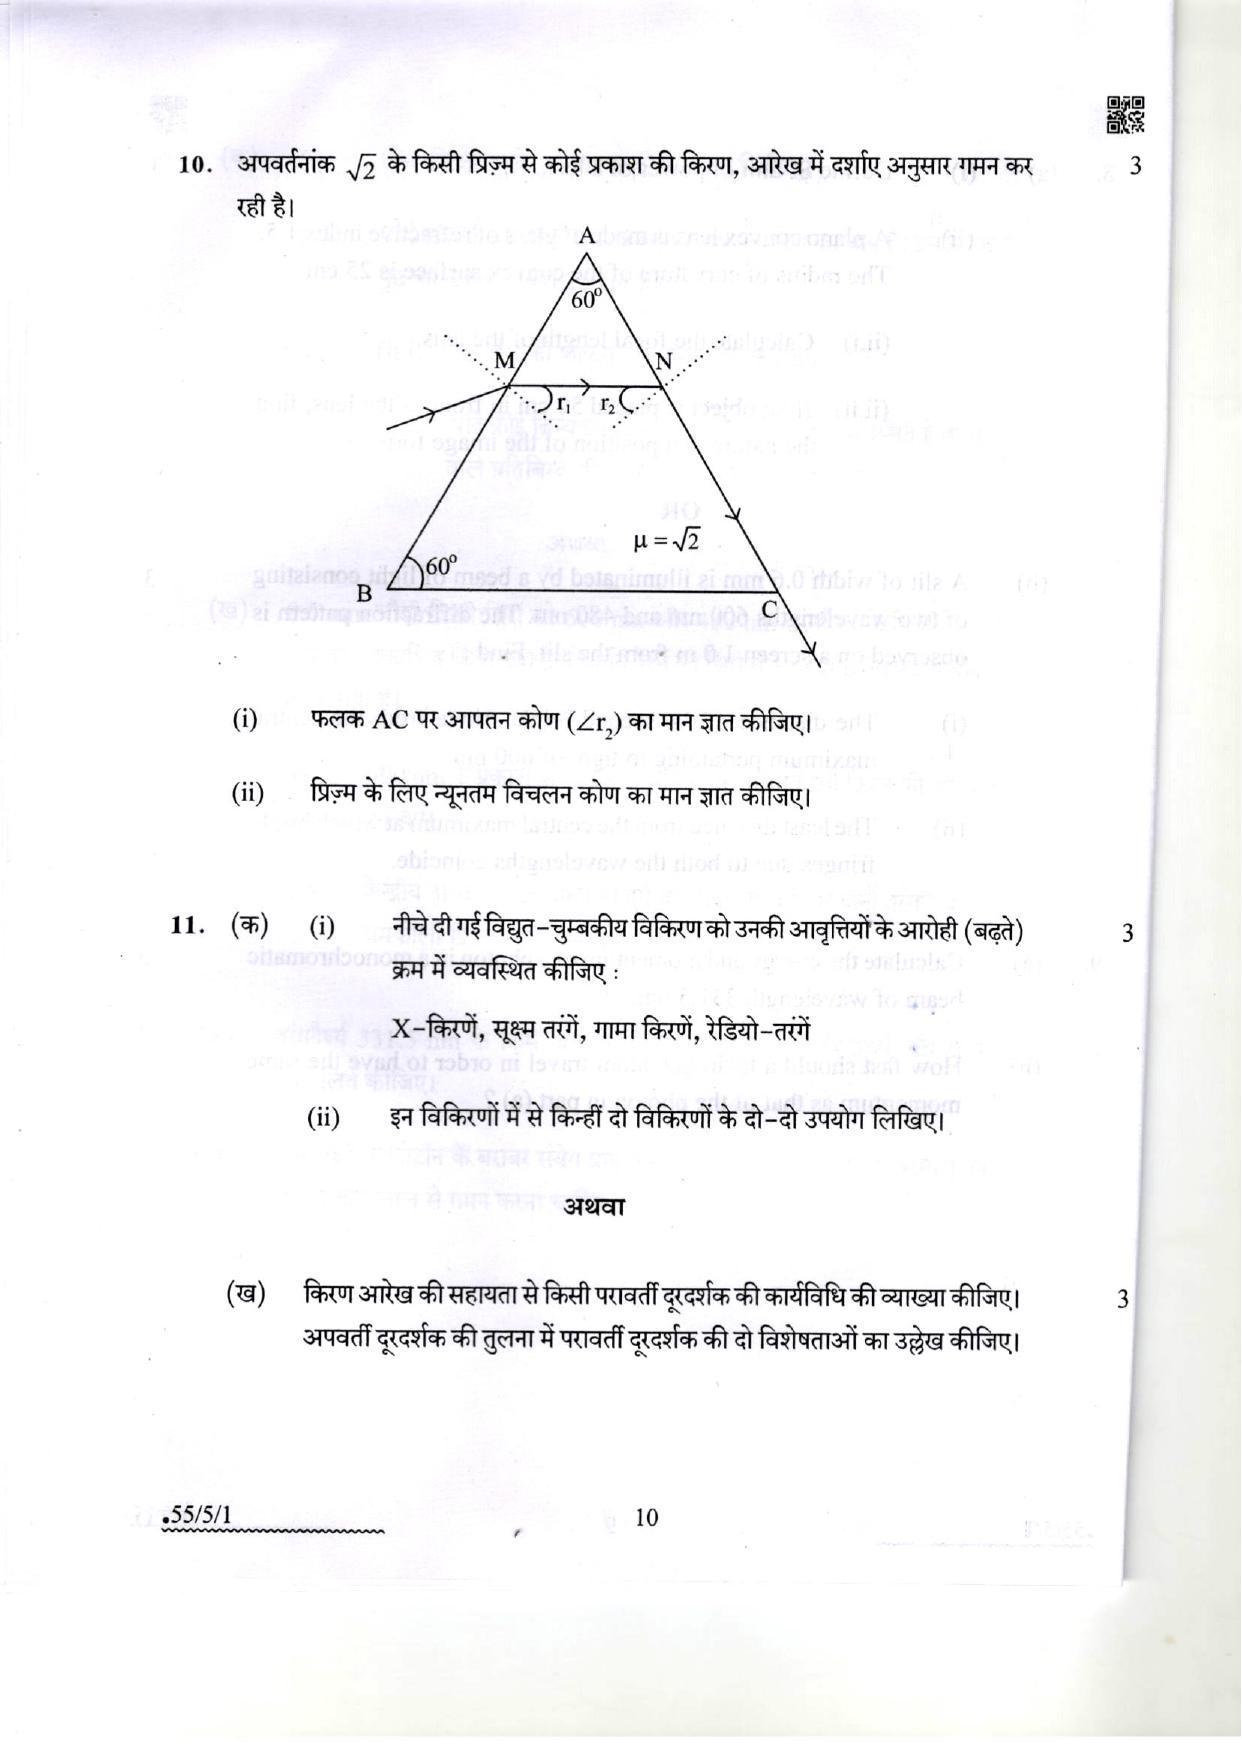 CBSE Class 12 55-5-1 Physics 2022 Question Paper - Page 10